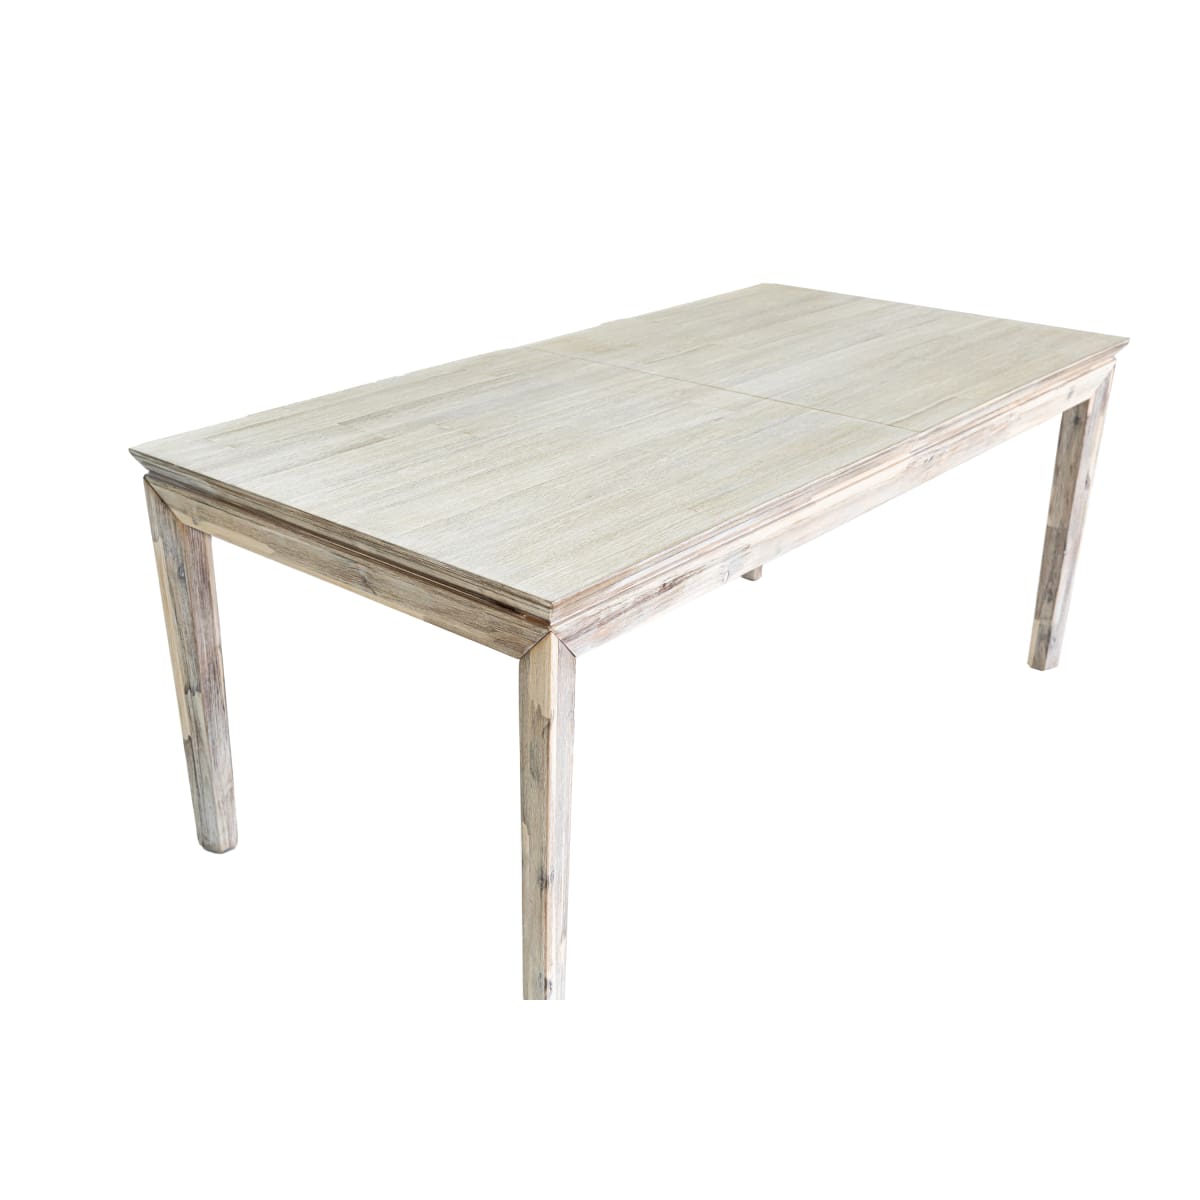 Mendes Extension Dining Table - dining-table